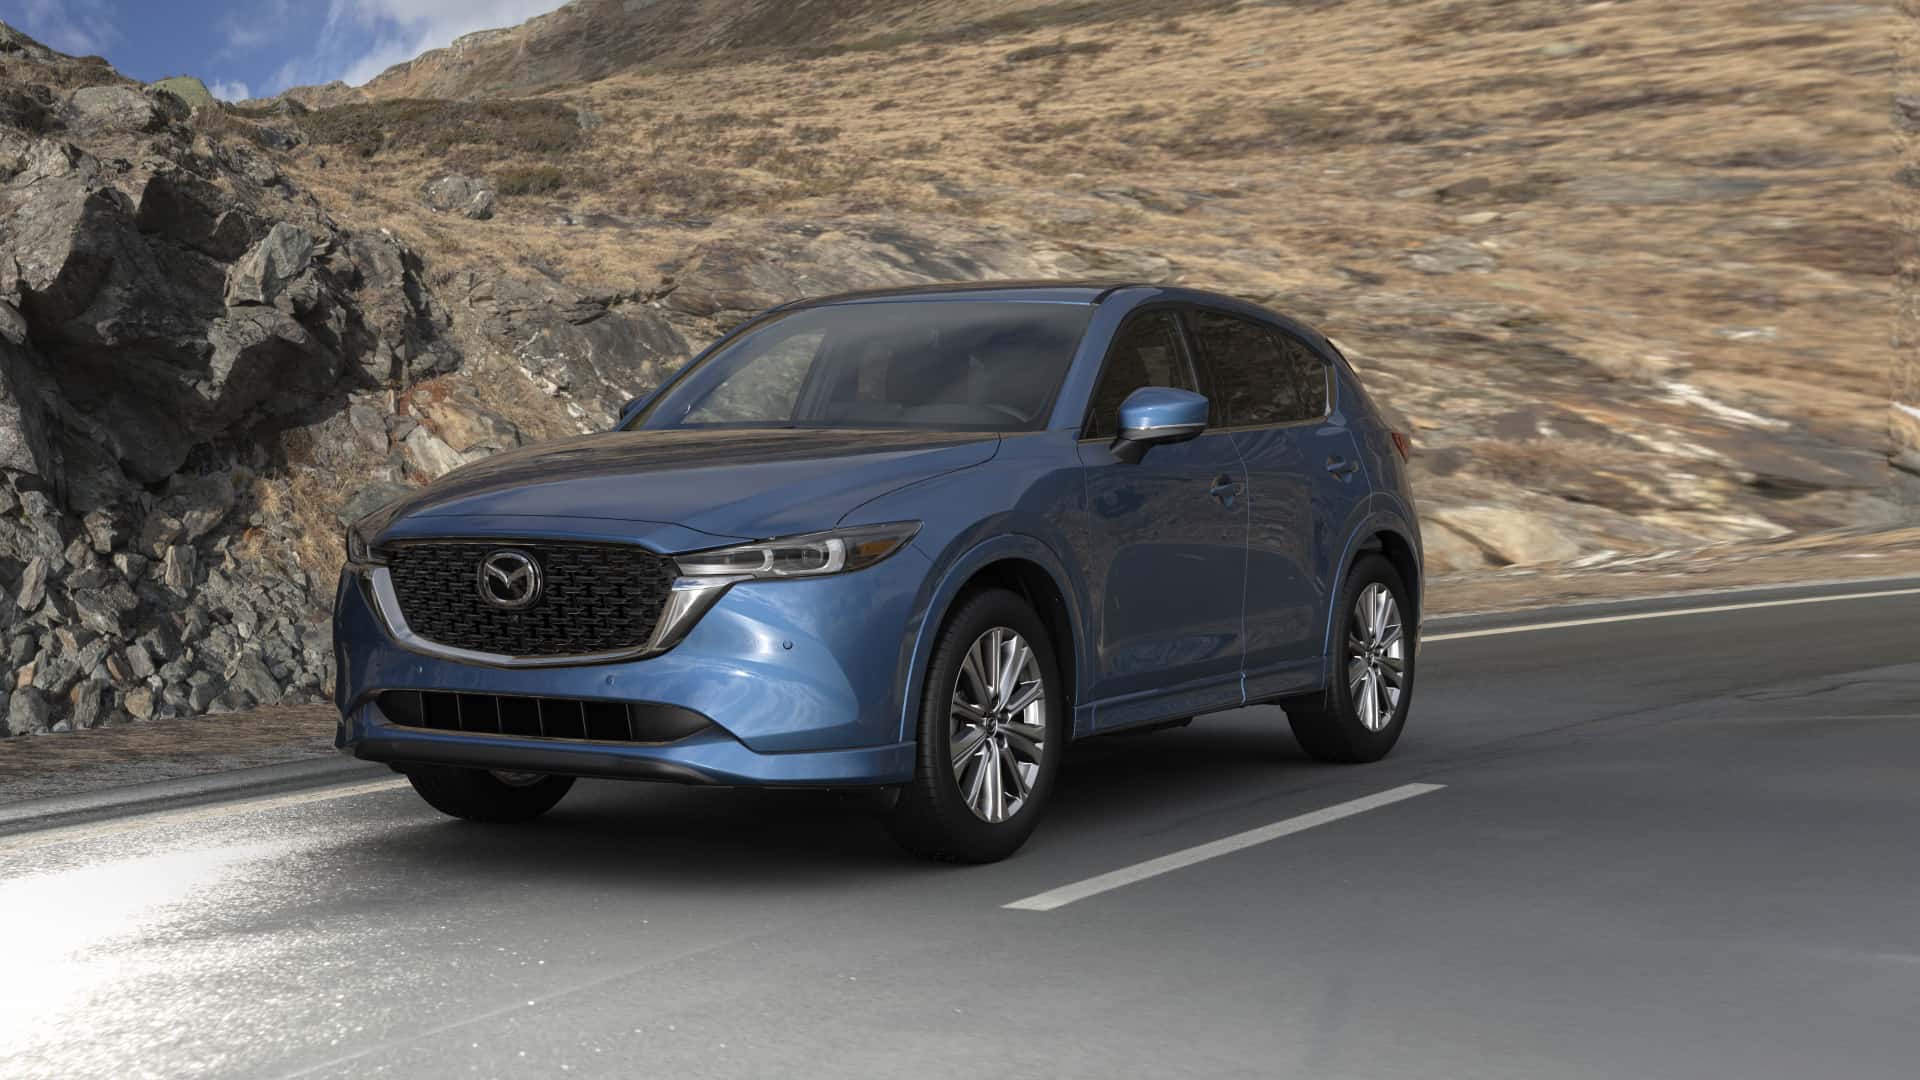 2023 Mazda CX-5 2.5 Turbo Signature Eternal Blue Mica | Mazda of South Charlotte in Pineville NC